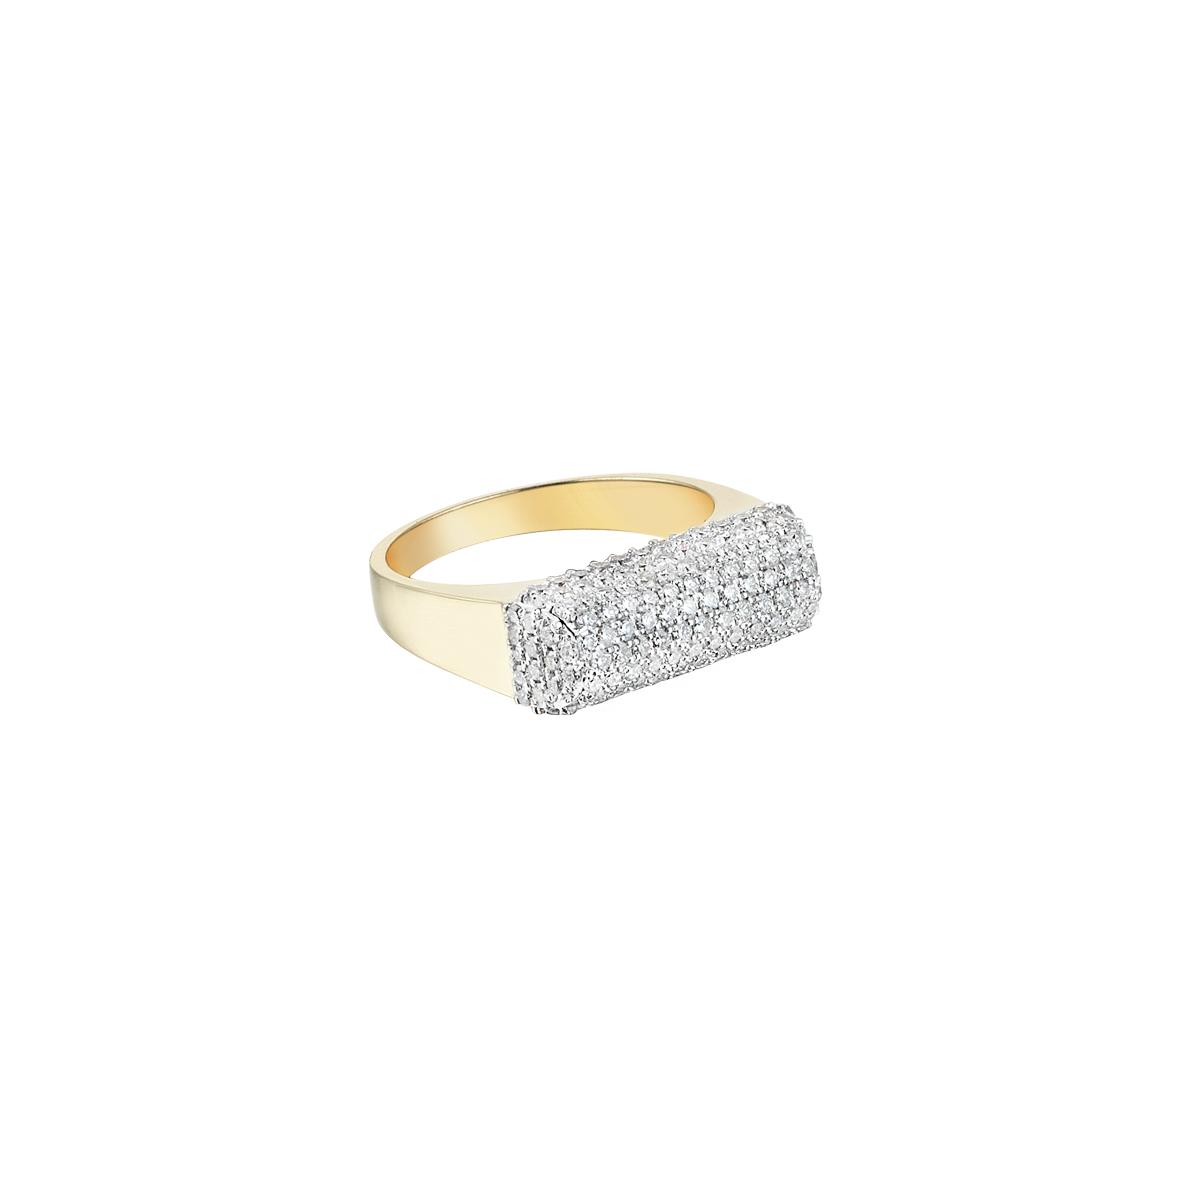 Pave Mountain Ring in Yellow Gold - Her Story Shop